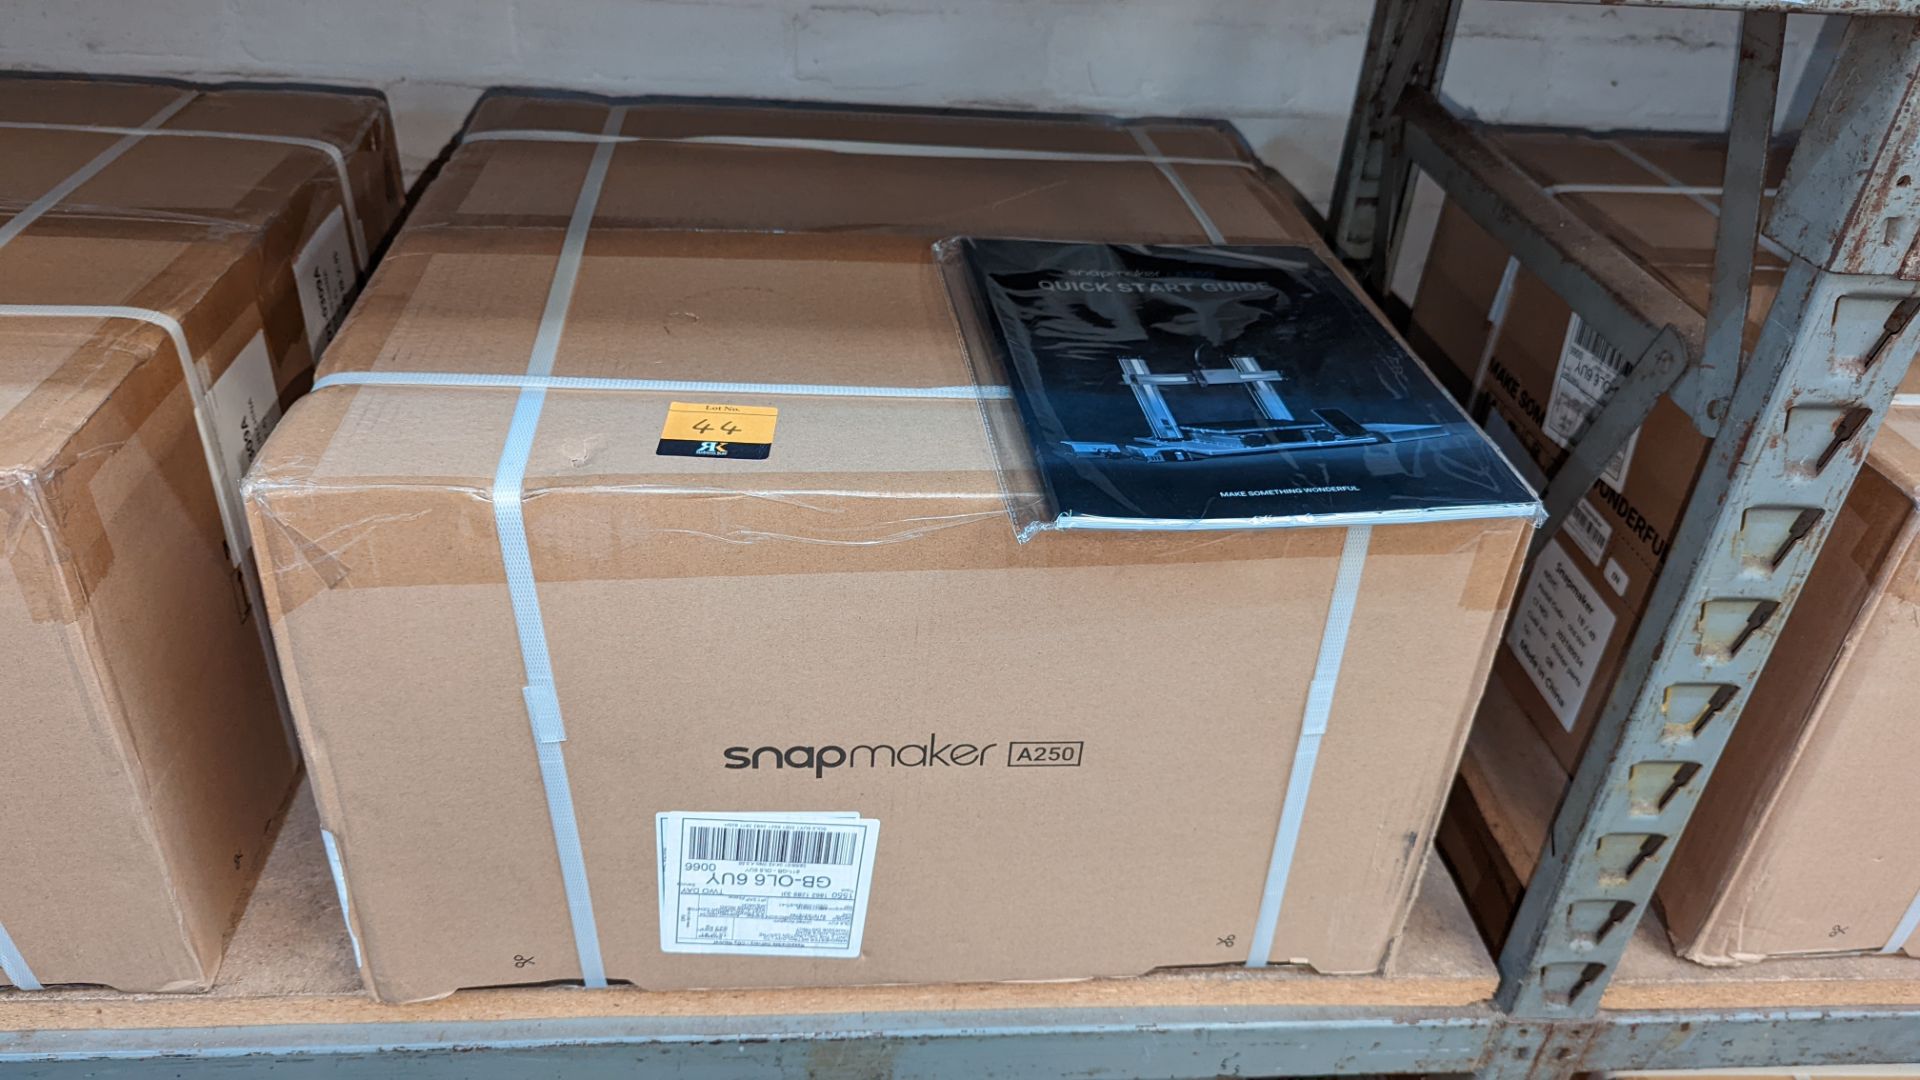 Snapmaker model A250 3D printer - boxed, delivered with original banding, assumed to be new/unused